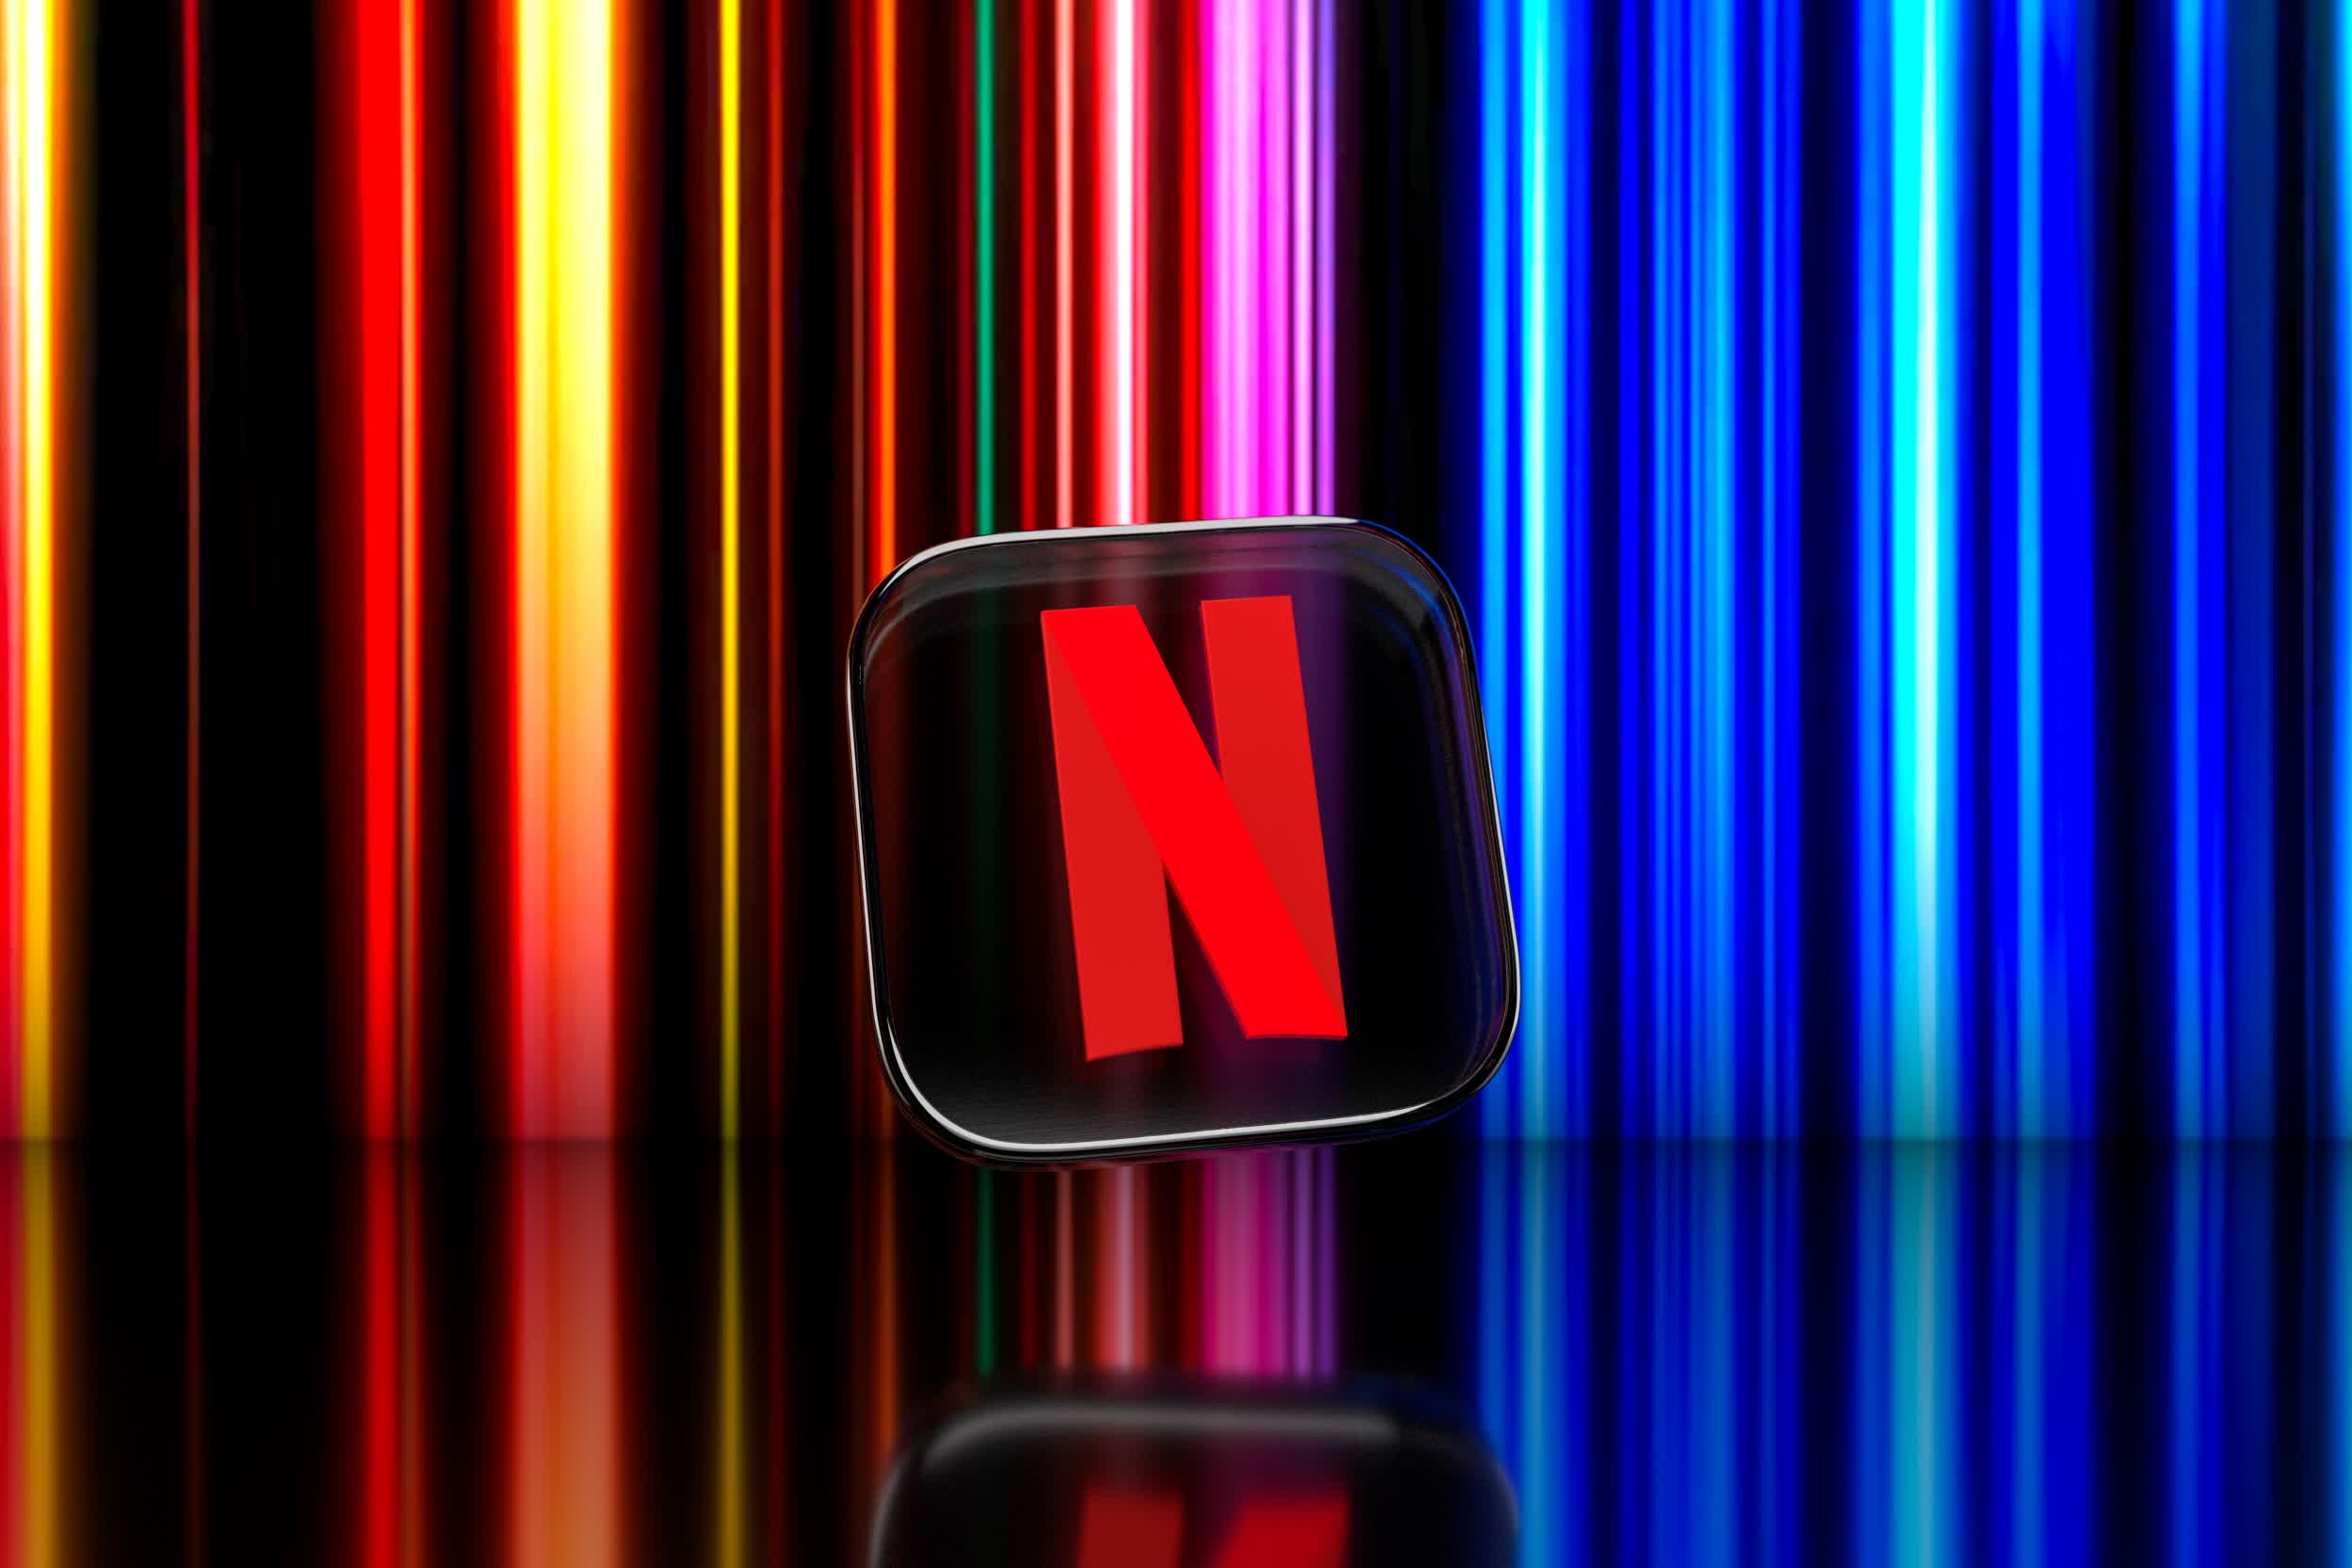 Netflix loses a quarter of its value on slowing subscriber growth